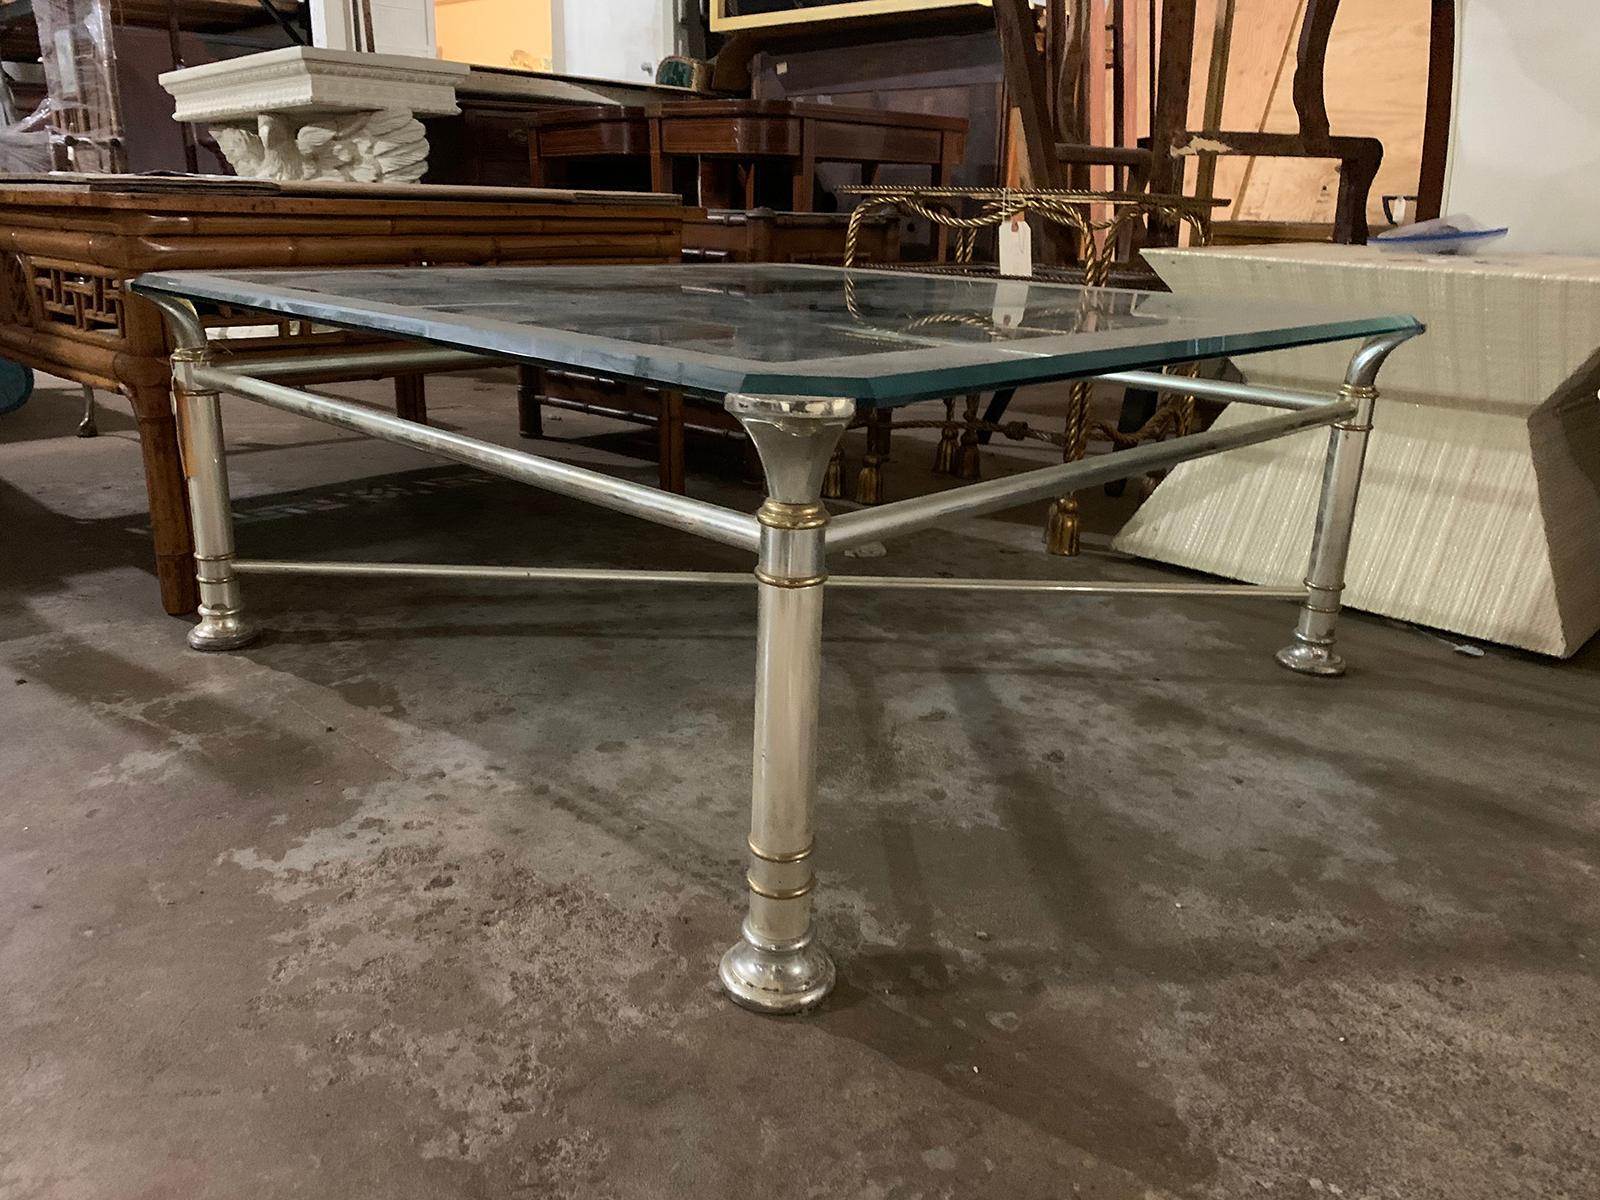 Mid-20th century square silver metal and brass coffee table with glass top.